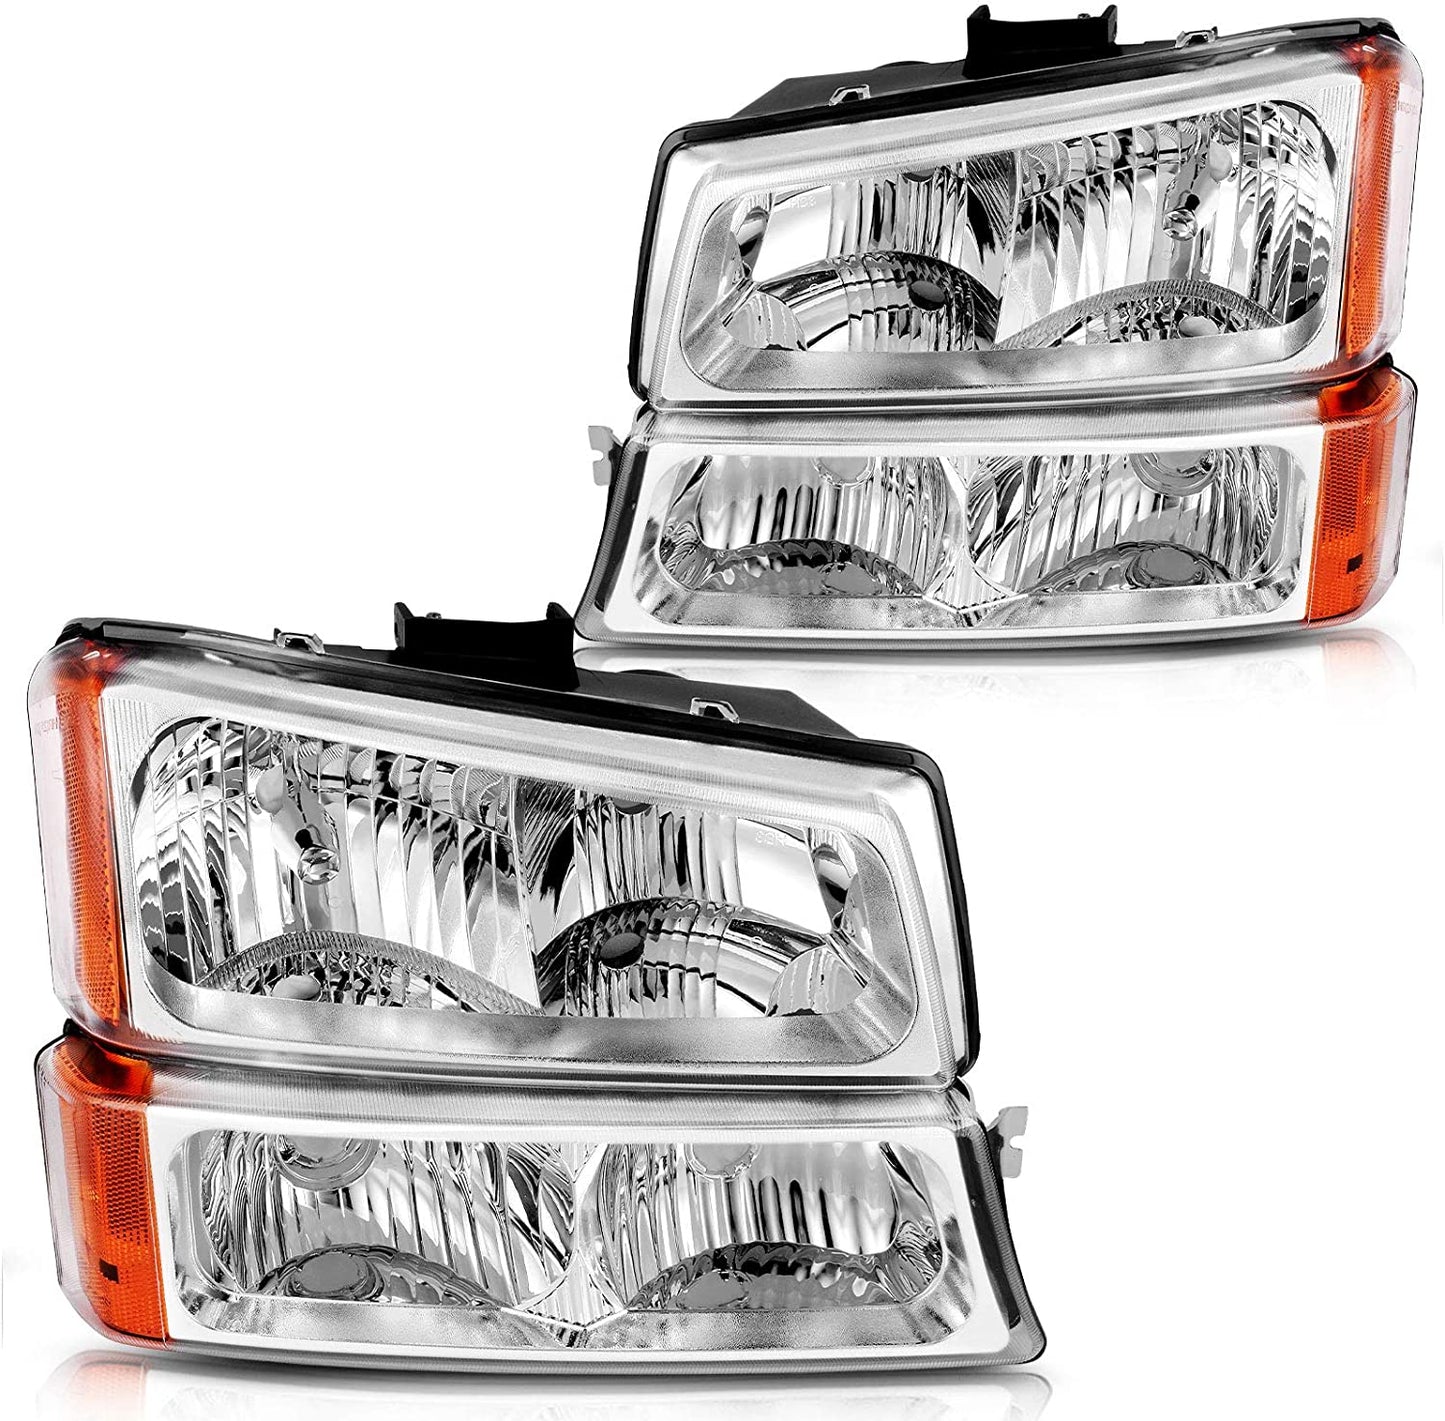 DWVO Headlight Assembly Compatible with Chevy Silverado Avalanche 1500 2500 3500 Black with Clear Housing